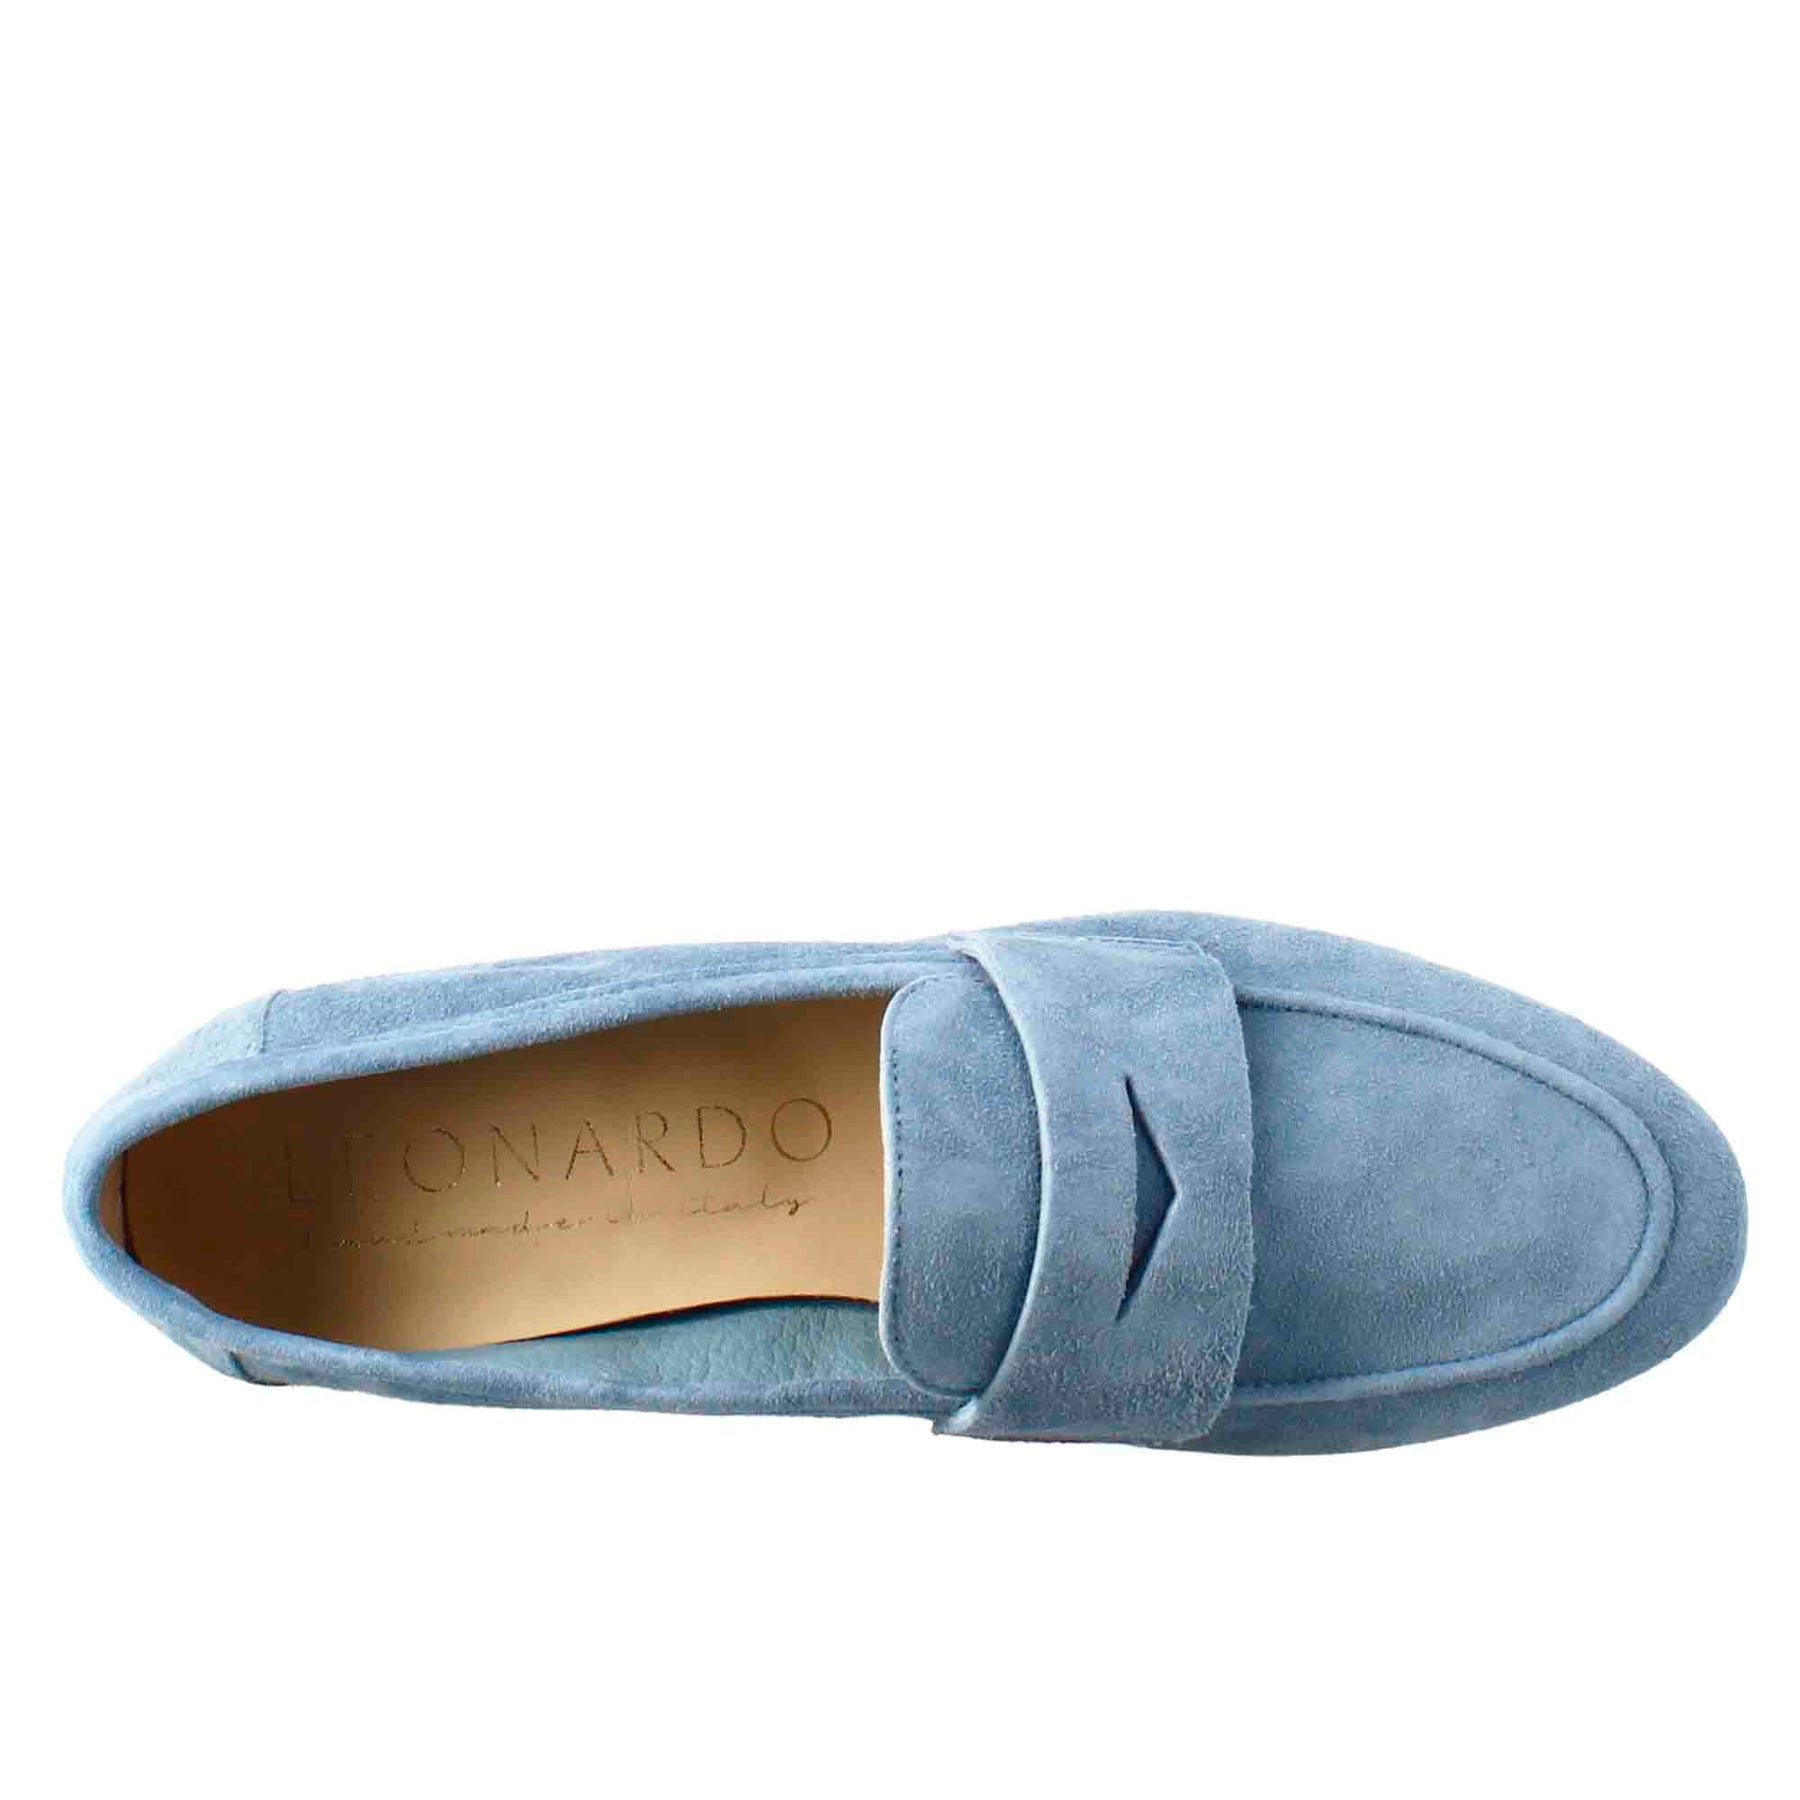 Flexible women's moccasin in light blue suede and rubber sole